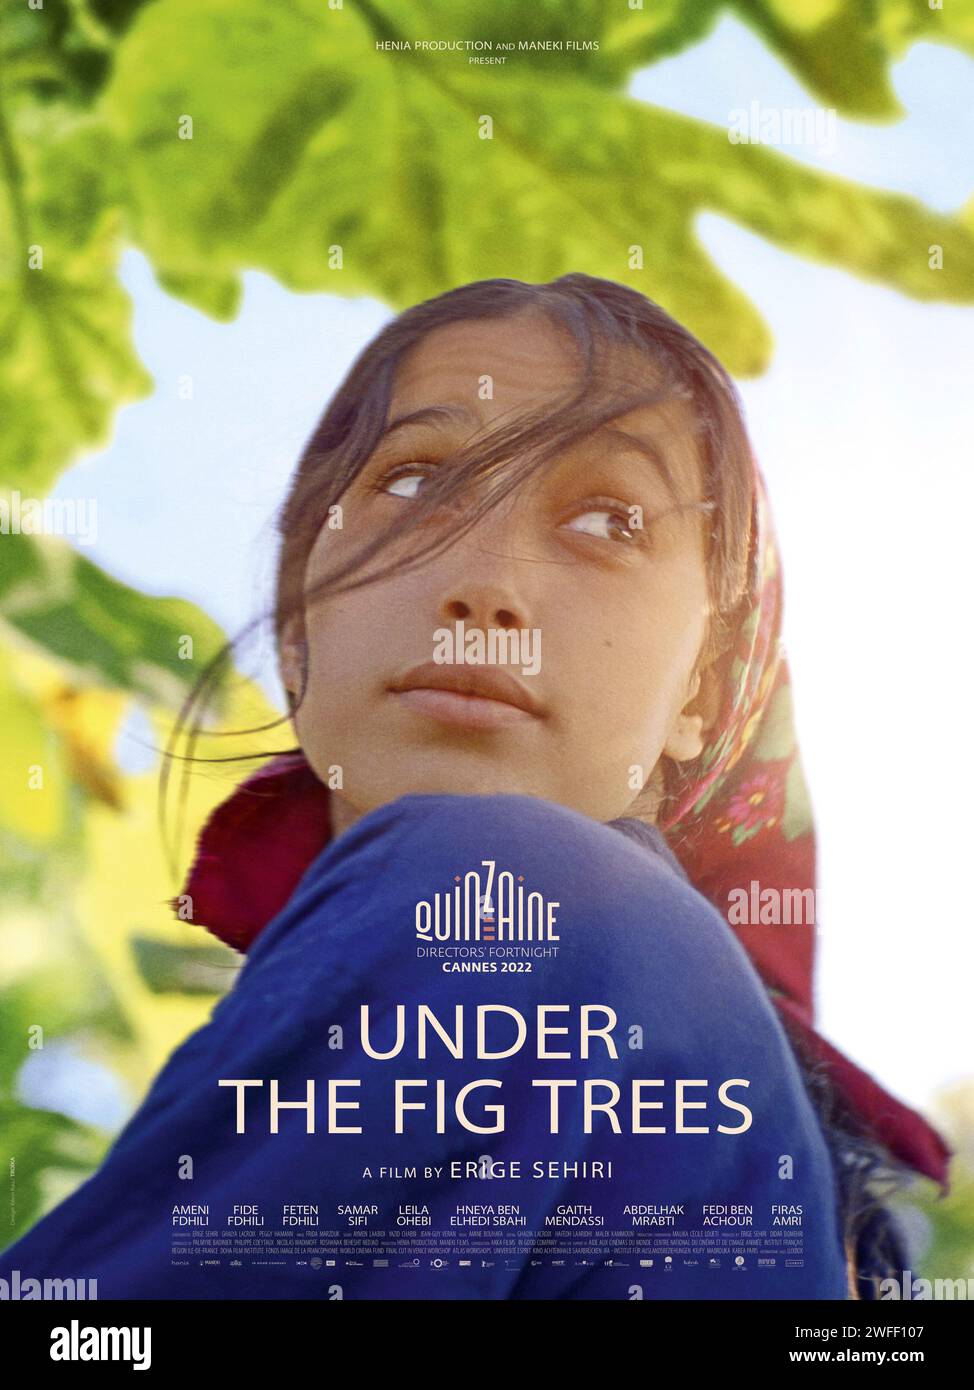 Under the Fig Trees (2006) directed by Erige Sehiri and starring Ameni Fdhili, Fide Fdhili and Feten Fdhili. Among the trees, young women and men working the summer harvest develop new feelings, flirt, try to understand each other, find - and flee - deeper connections. Publicity poster ***EDITORIAL USE ONLY***. Credit: BFA / Luxbox Stock Photo